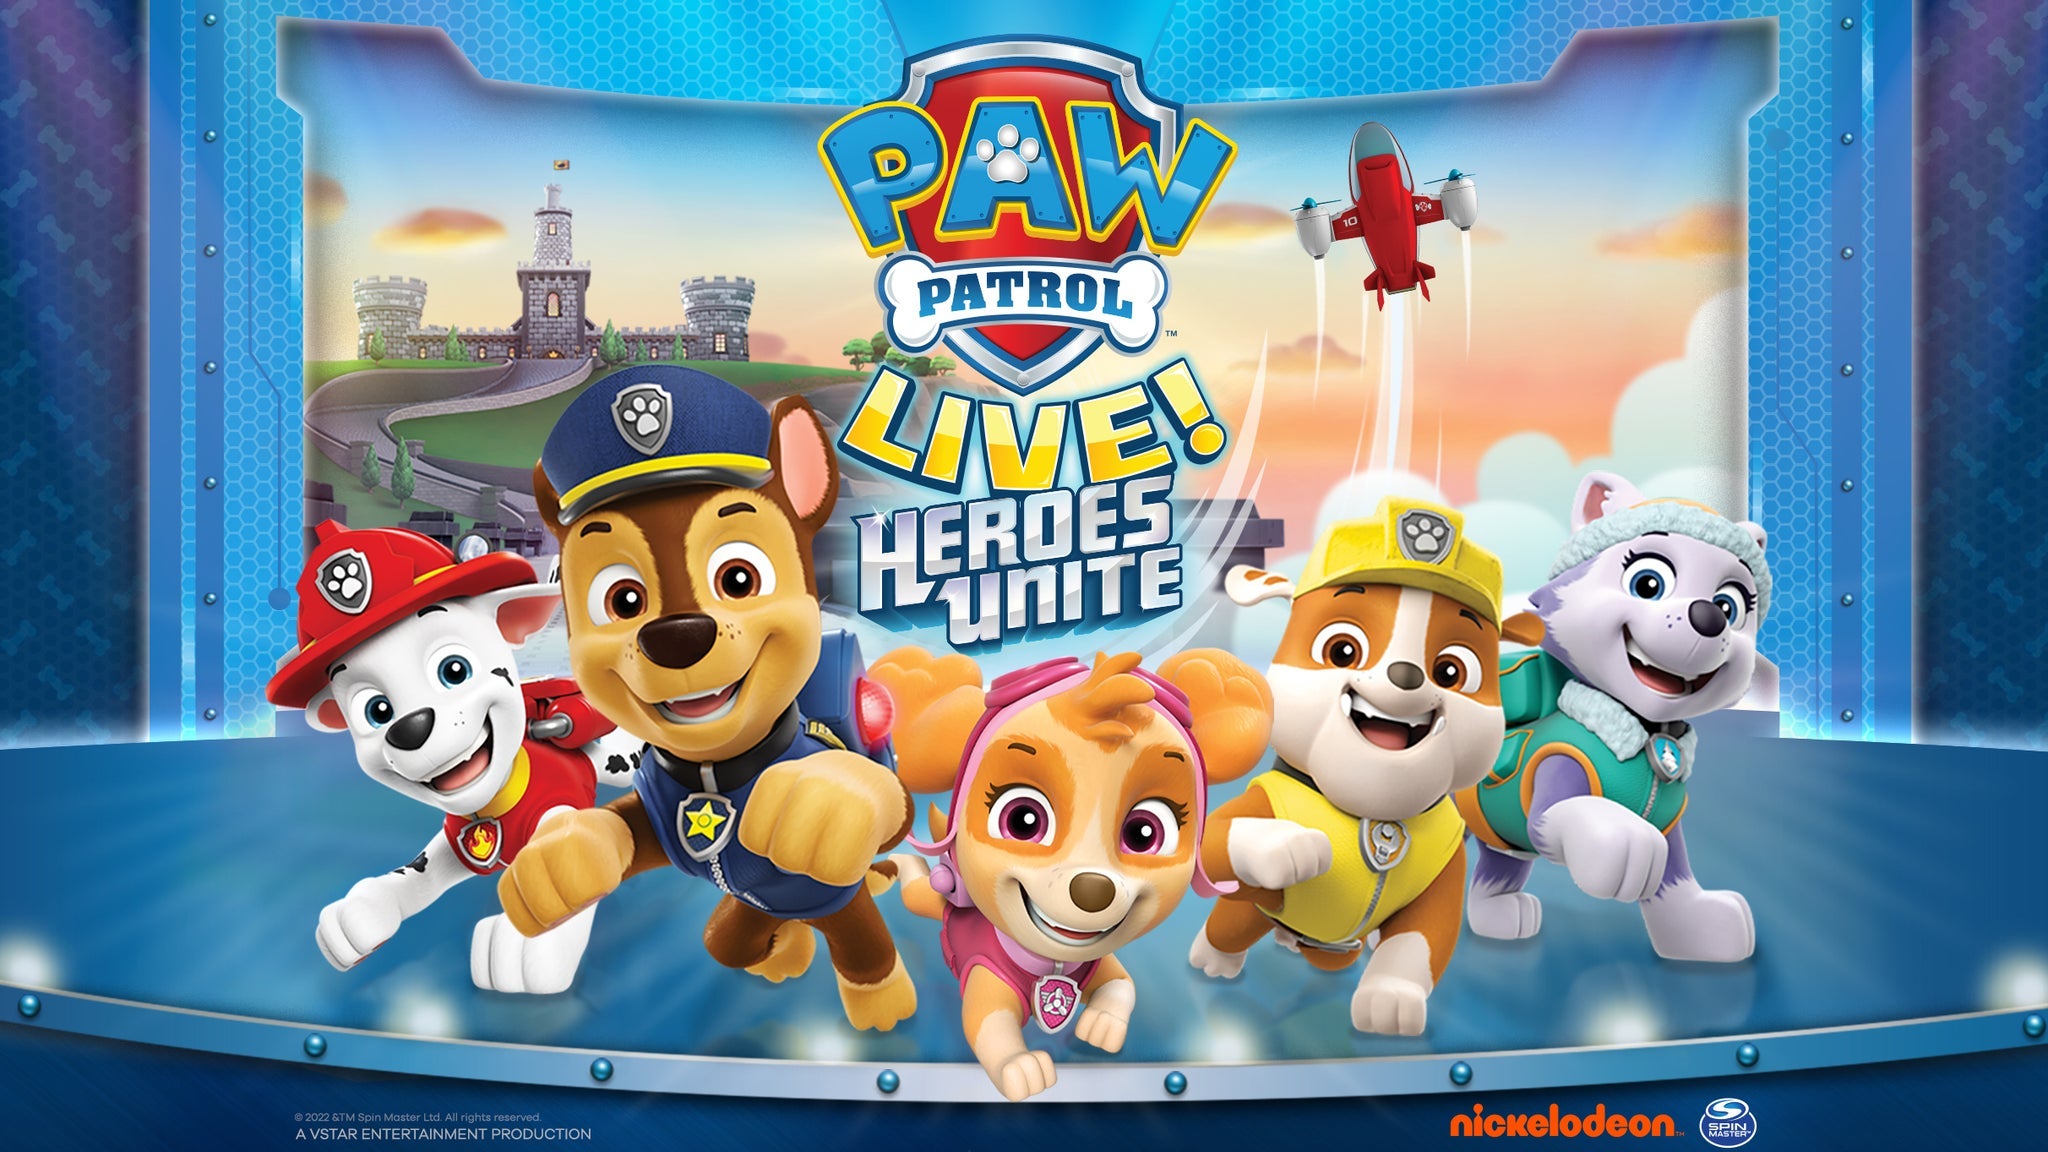 Paw Patrol Live: Heroes Unite at The Chicago Theatre